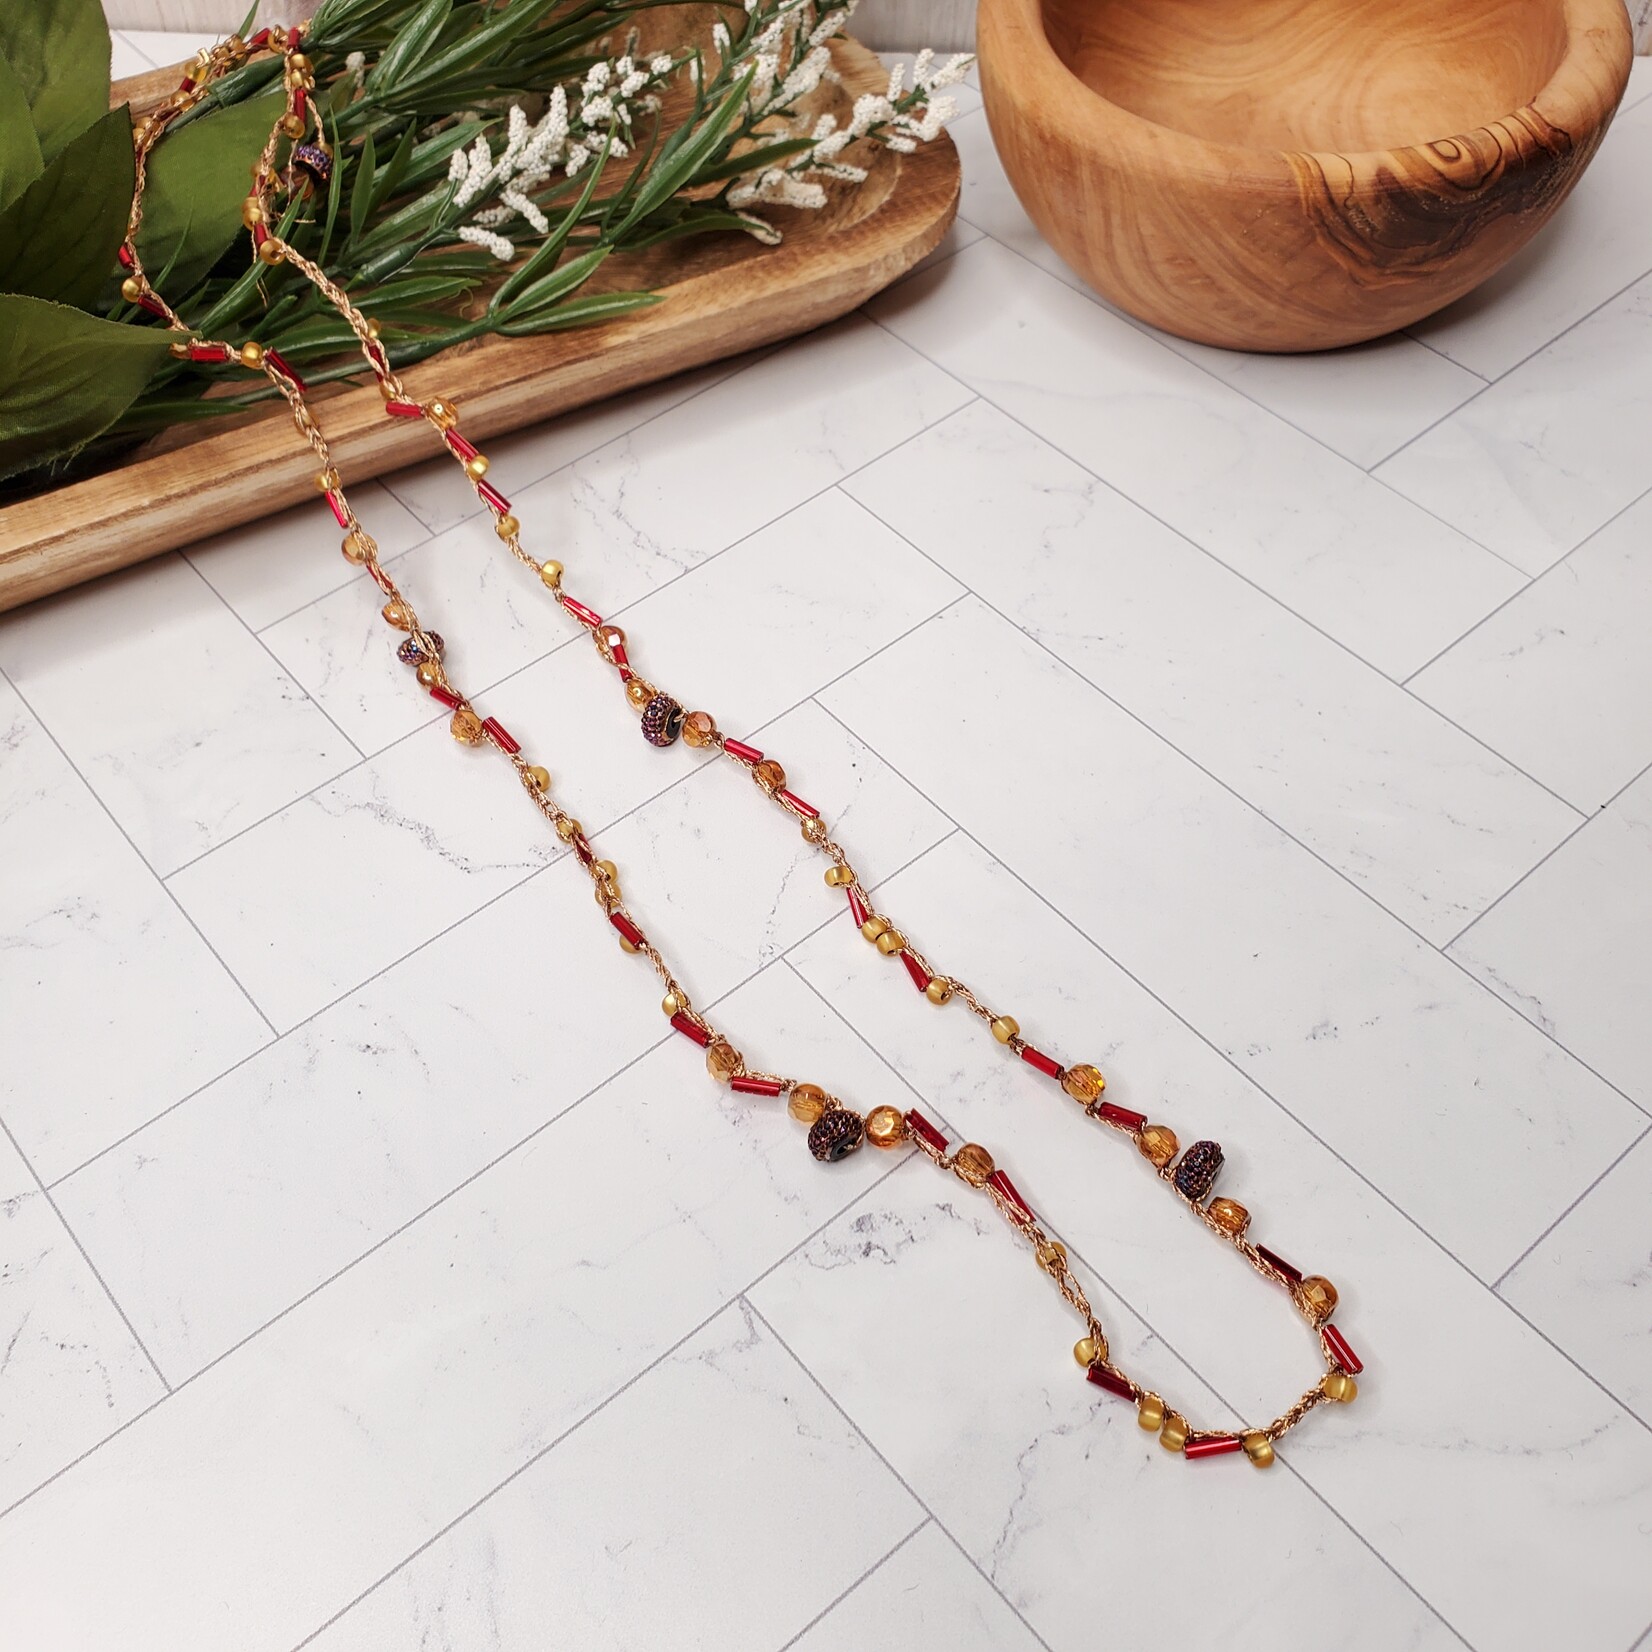 Crescent Moon Jewelry of the Sierras Bead Crochet Necklace - Red & Gold - 28"